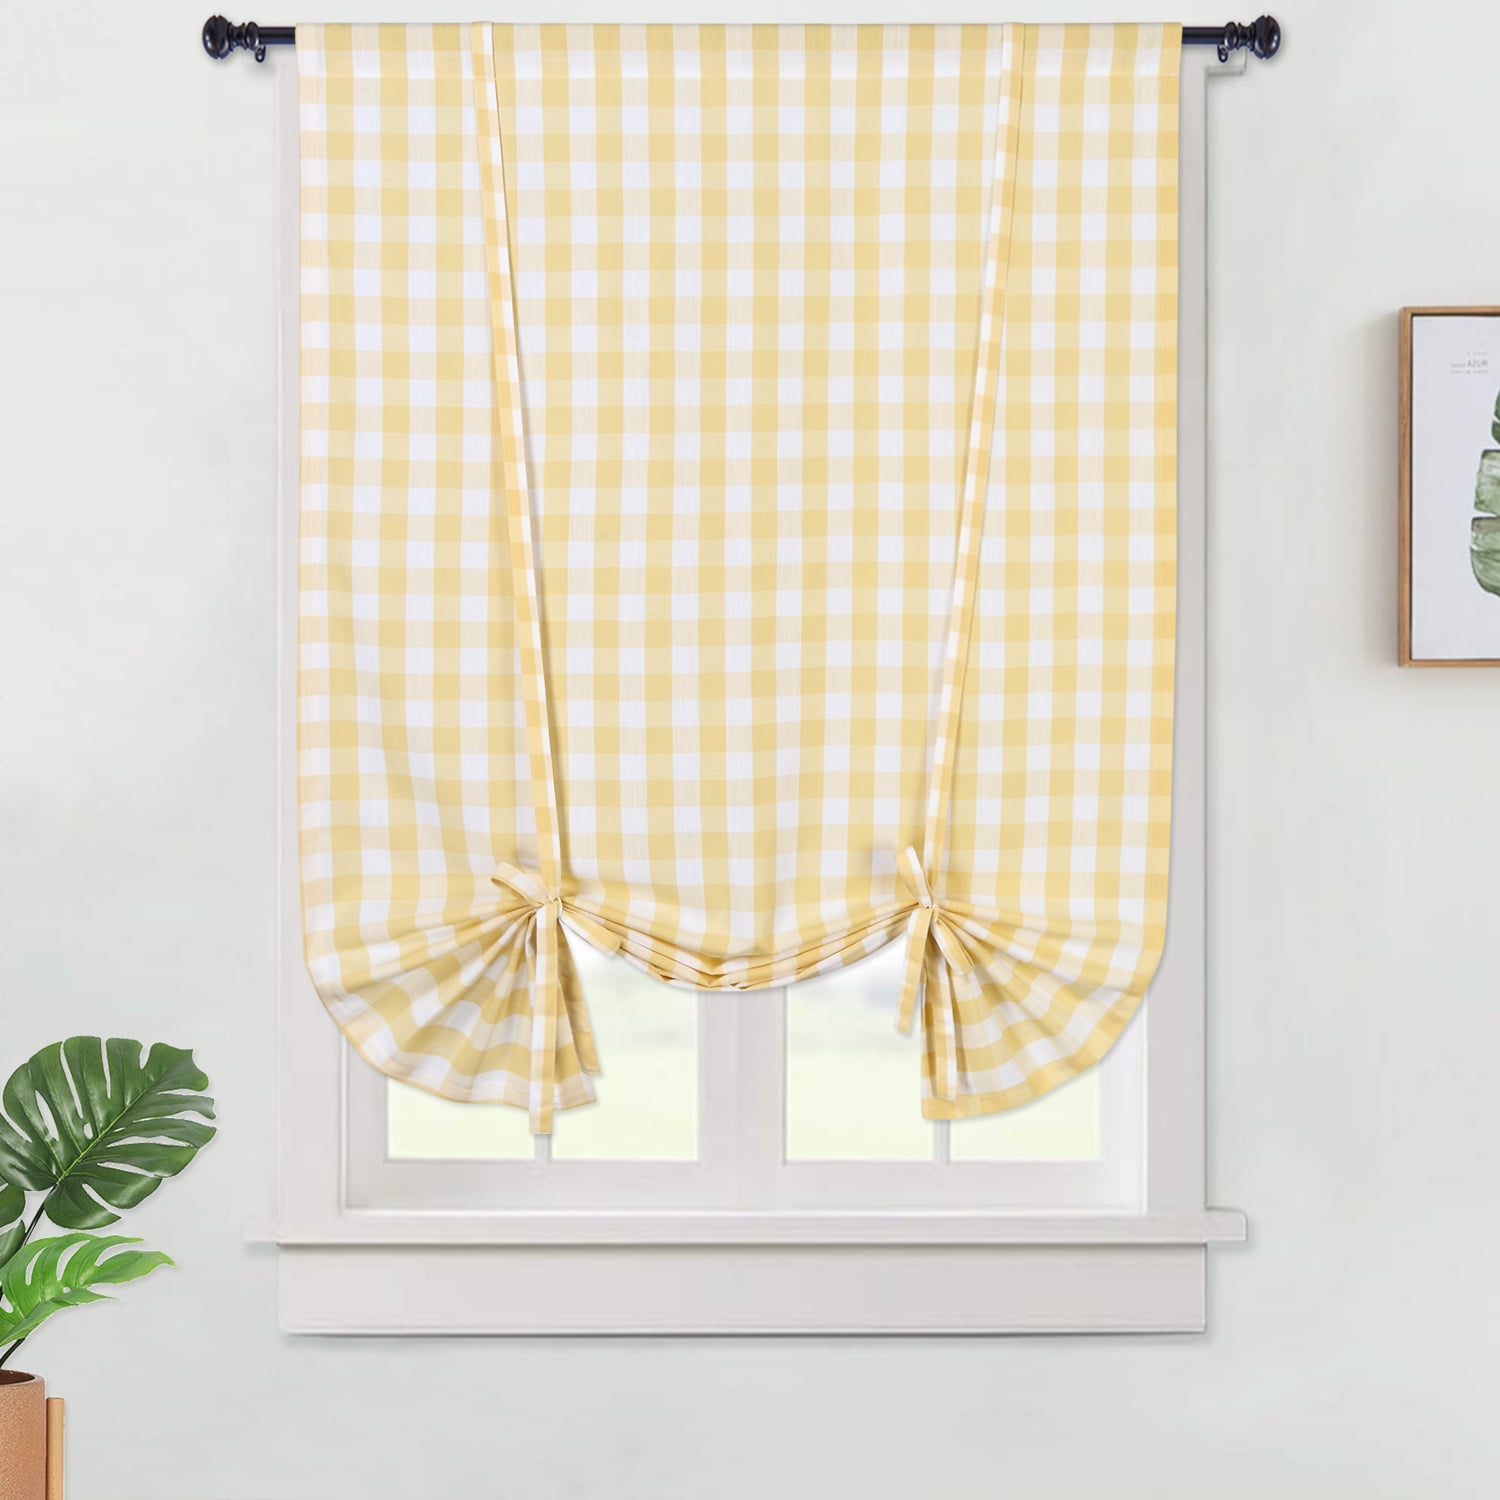 Blue Blue and White Buffalo Plaid Gingham Check Short Half Window Tier Curtains for Kitchen Bathroom Window Curtain CAROMIO Cafe Curtains 24 Inch